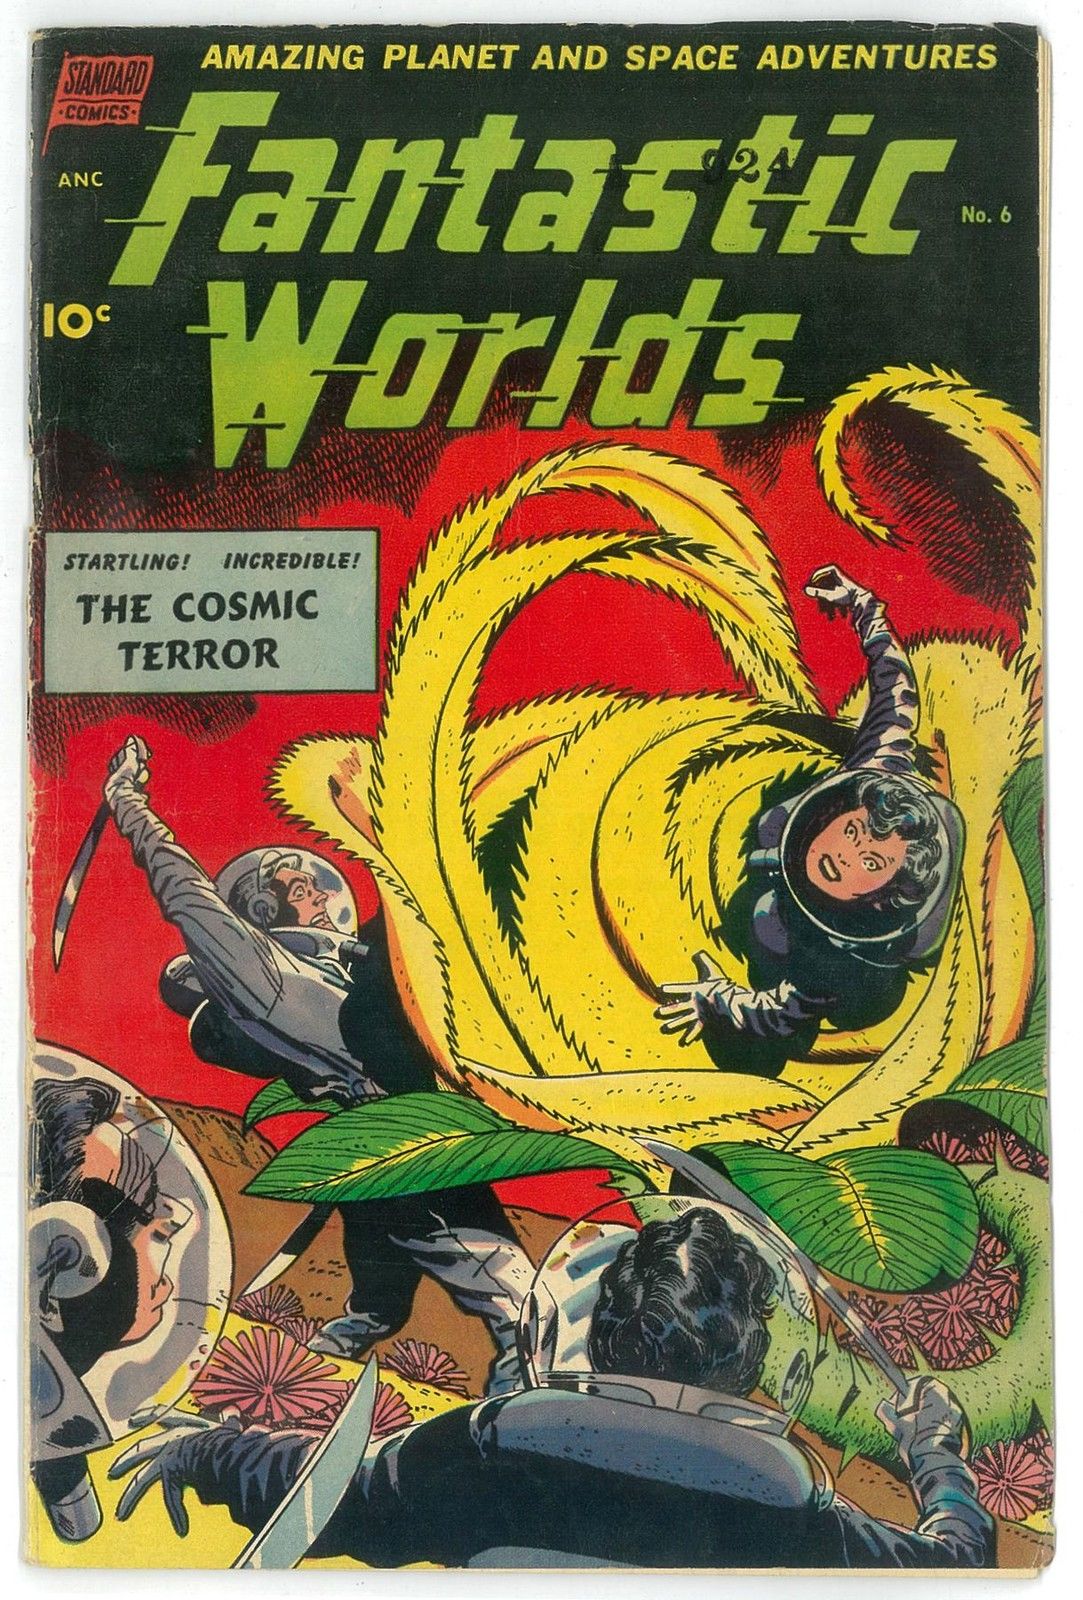 Fantastic Worlds #6 VG+ Pre-Code Space Age Cover